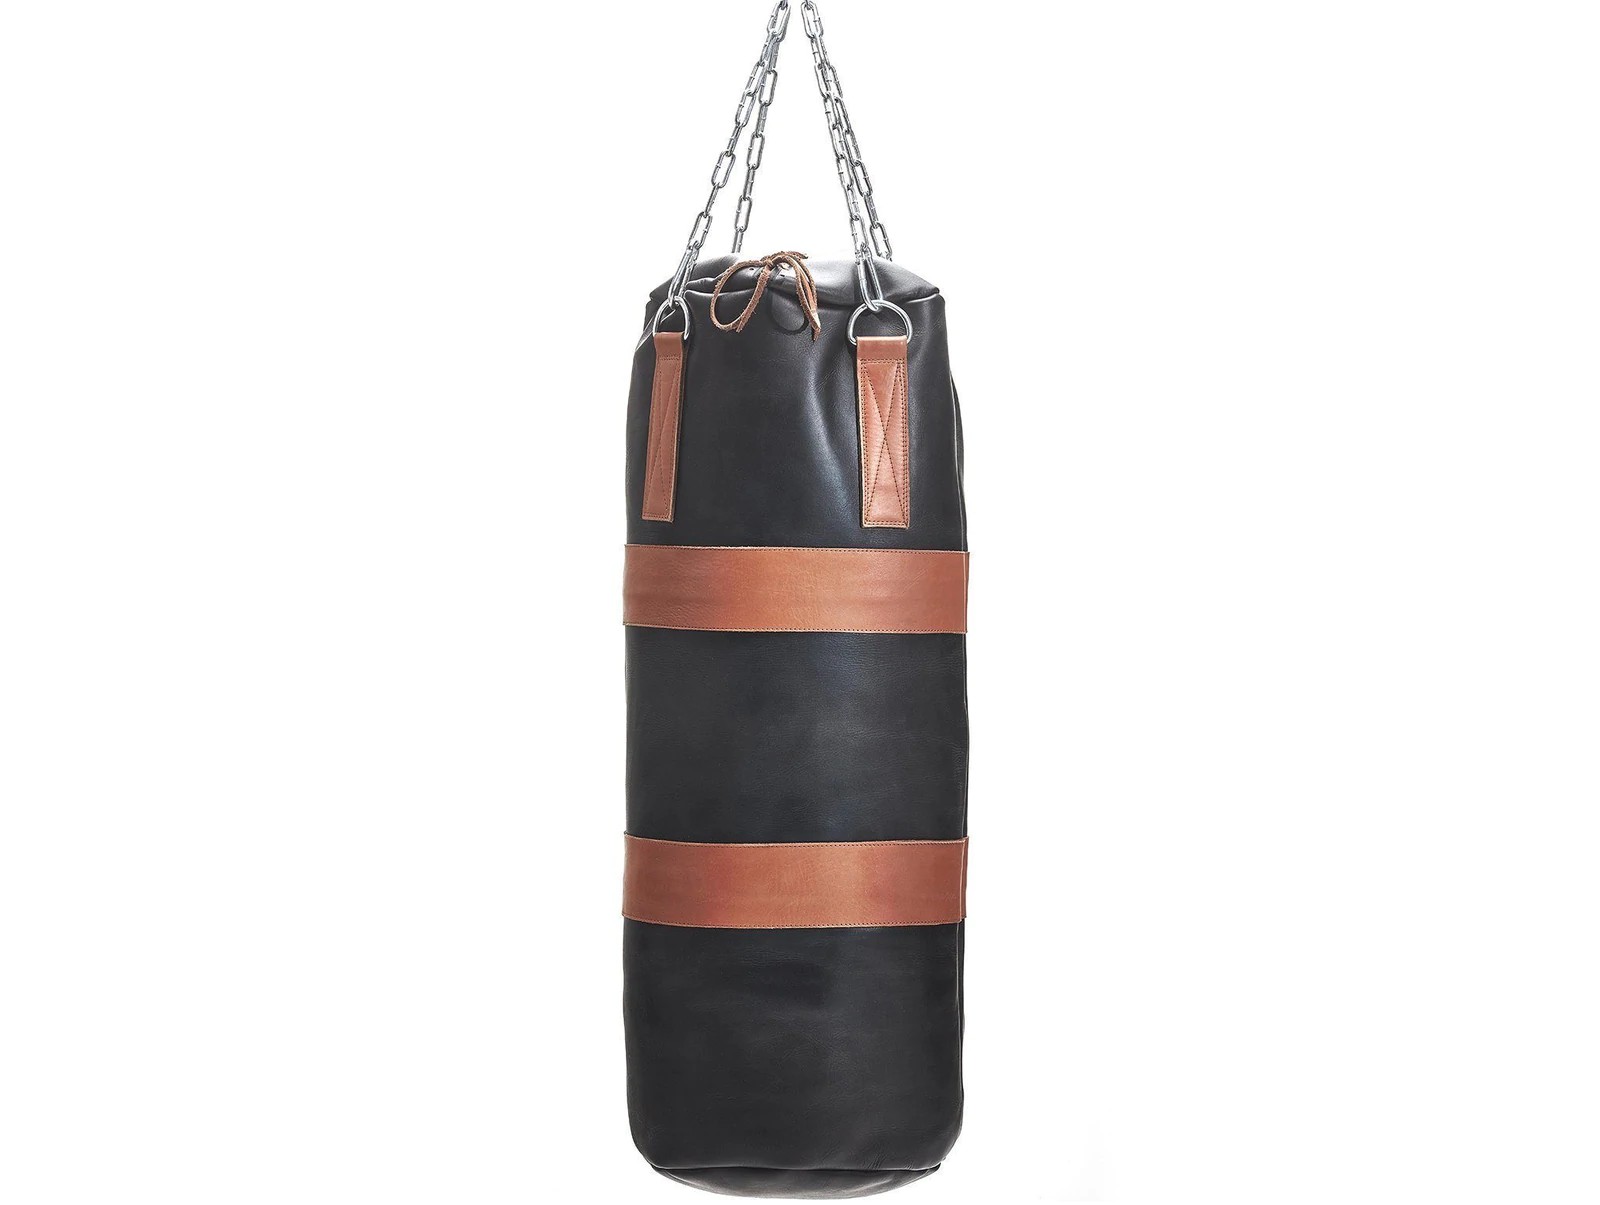 Punching Bag for Boxing training - Heavy duty BESTSPORTS Boxing Bag